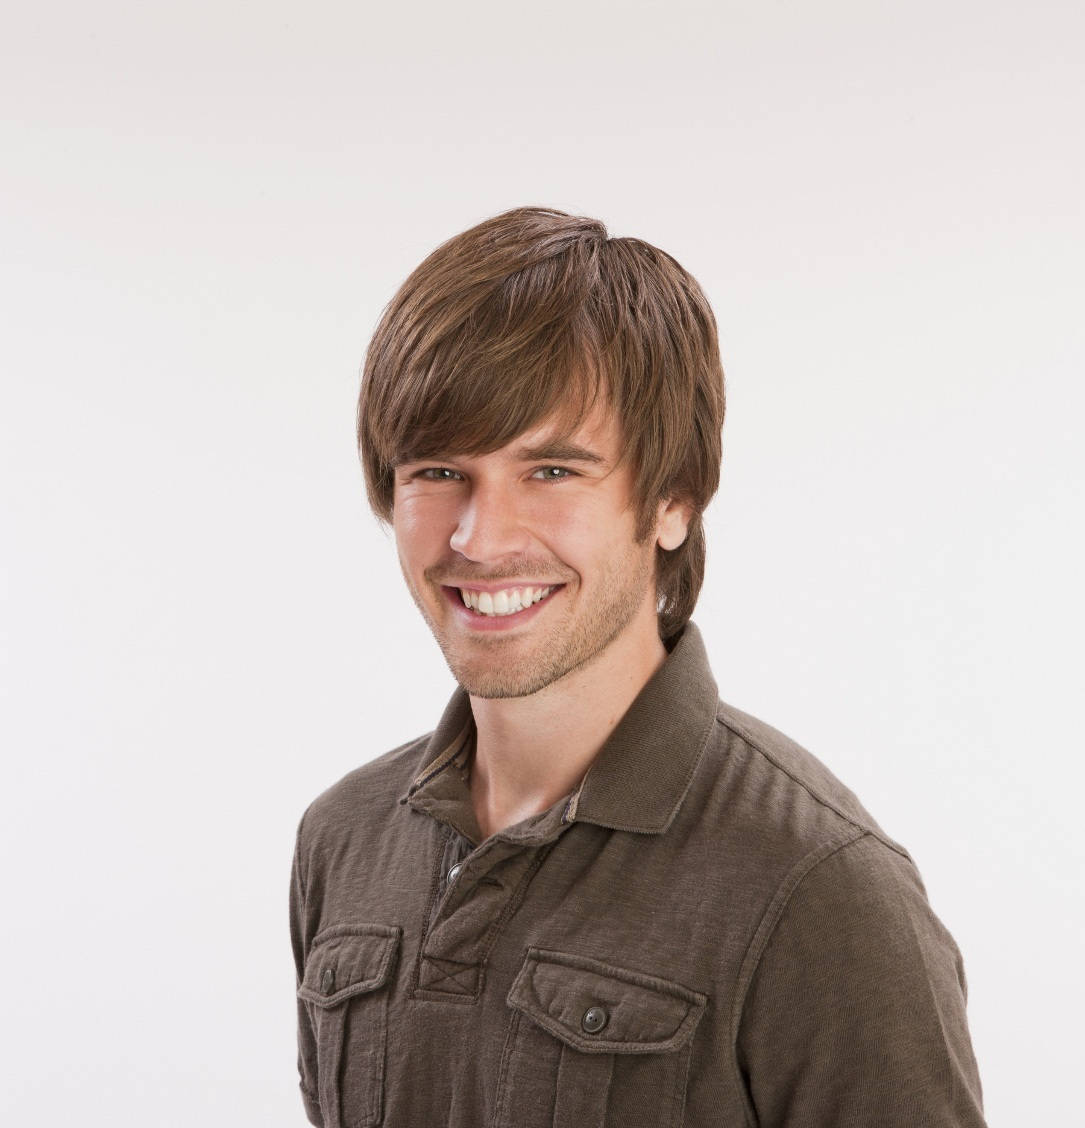 Handsome Graham Wardle with alluring brown hair Wallpaper